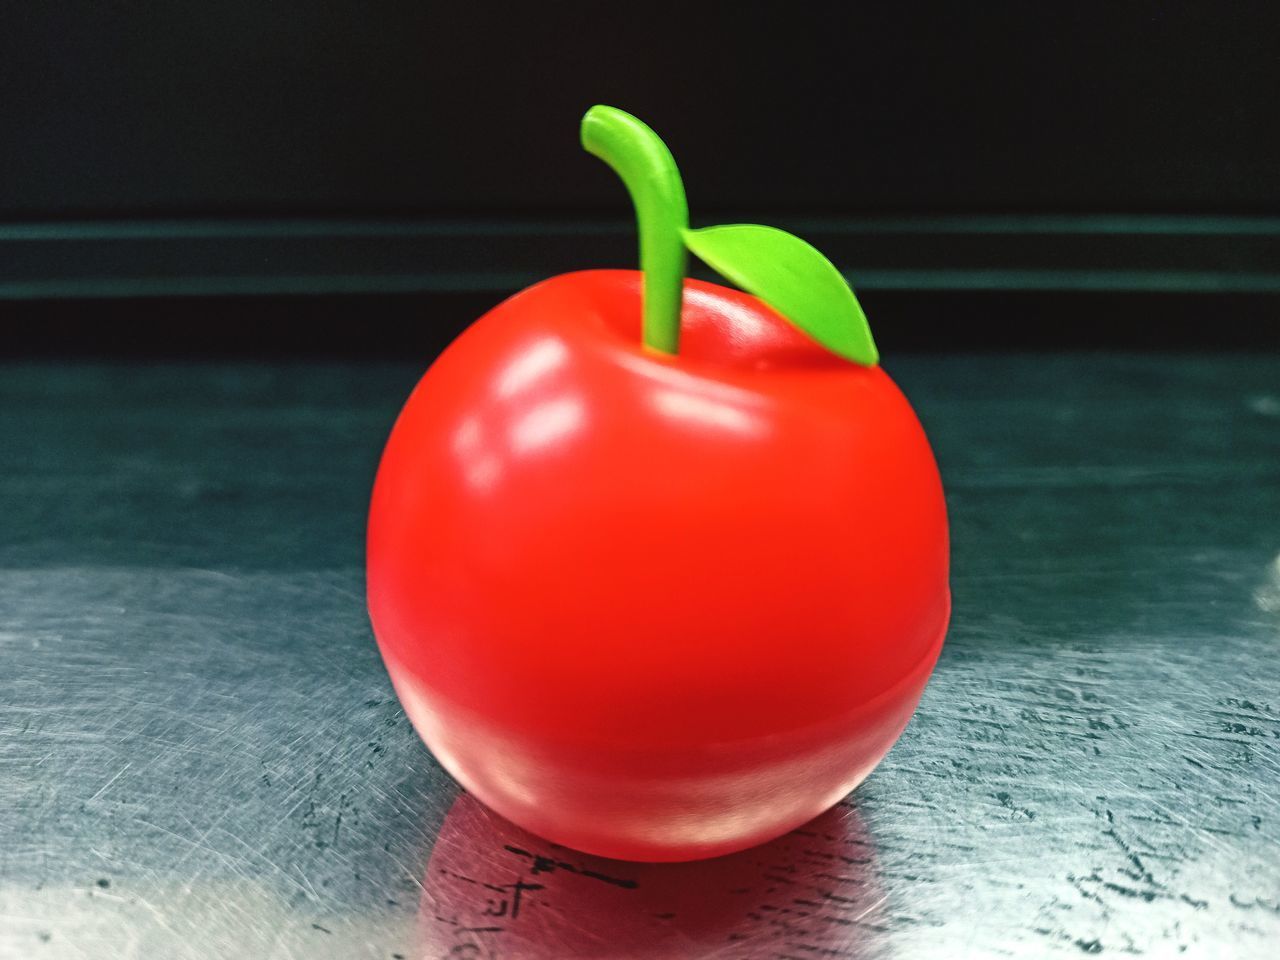 CLOSE-UP OF RED BELL PEPPERS AND TABLE